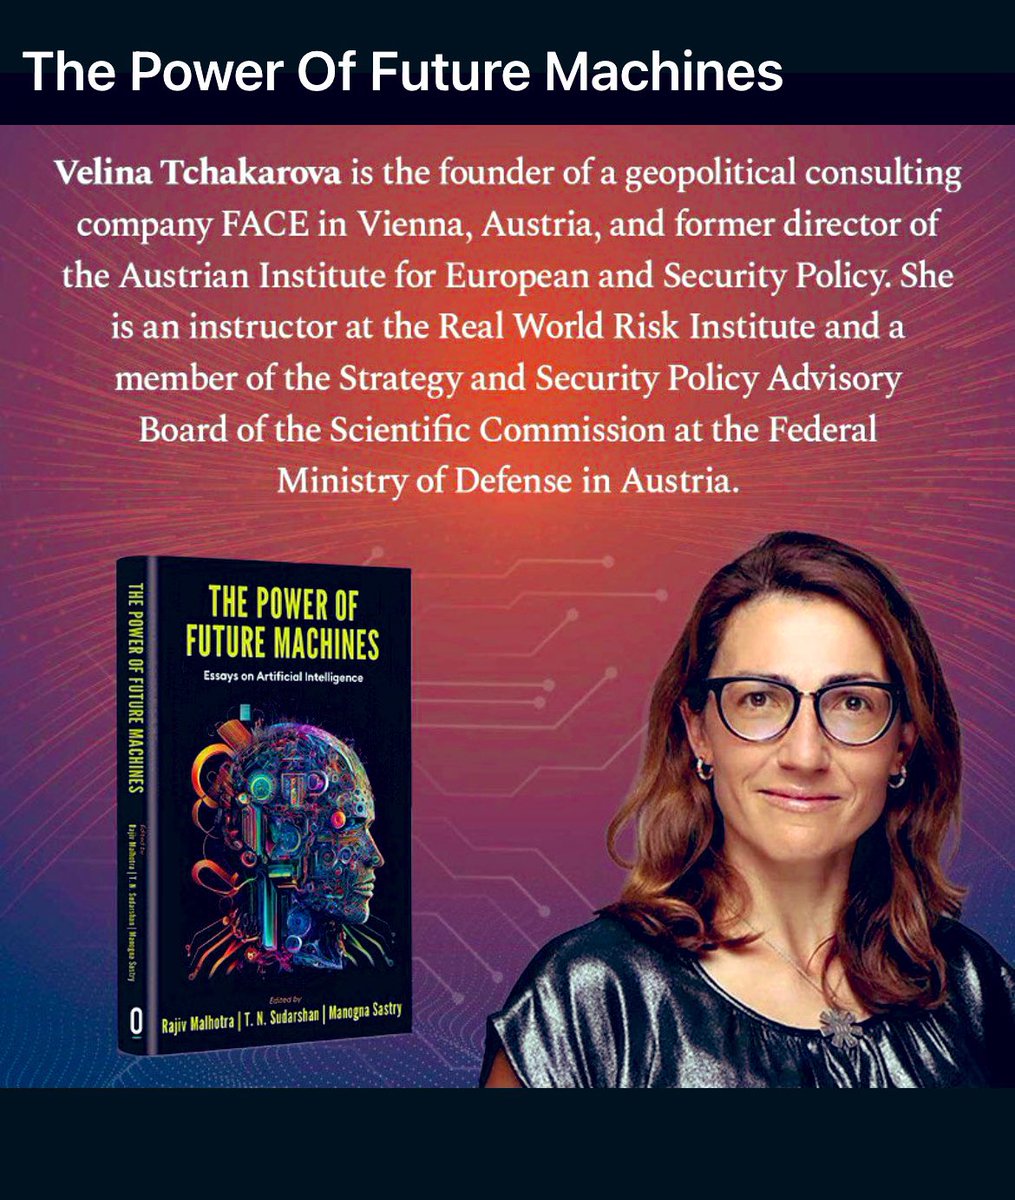 💥‼️ I‘m very excited about the upcoming workshop with @LKCyber on Technology and Geopolitics near Vienna, where I will be also covering the insights from my recent essay that deals with India‘s role in the #AI competition between the #US and #China. 
Check out the „The Power of